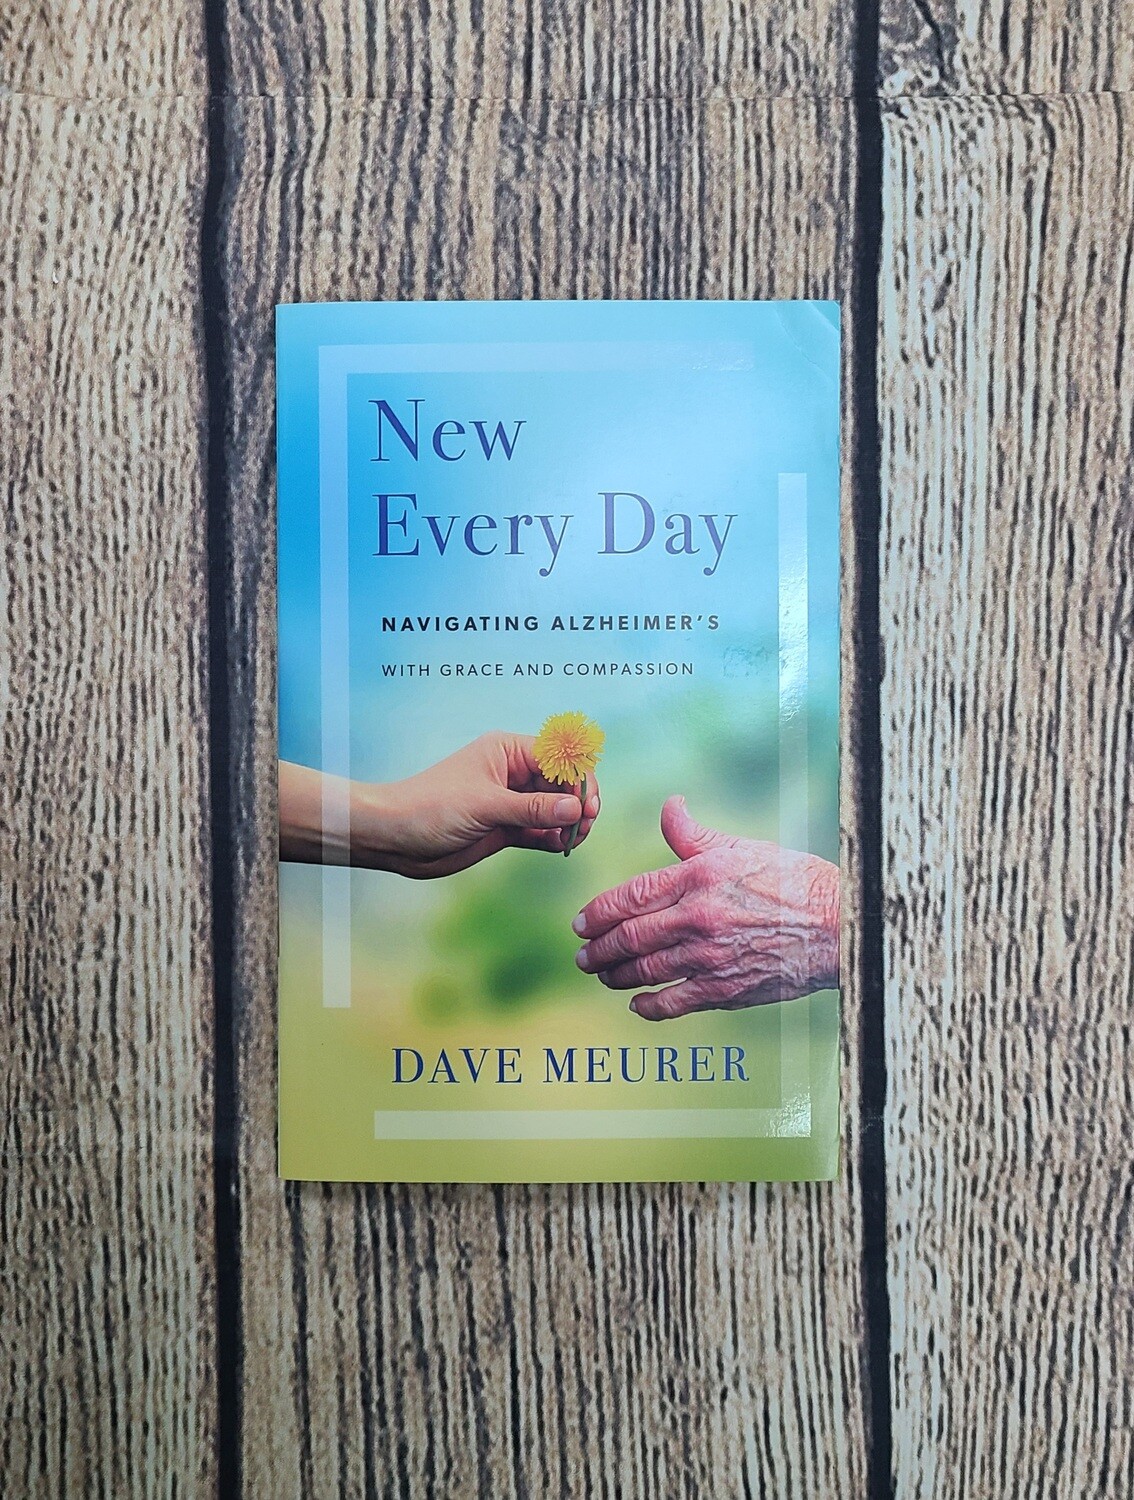 New Every Day: Navigating Alzheimer's with Grace and Compassion by Dave Meurer